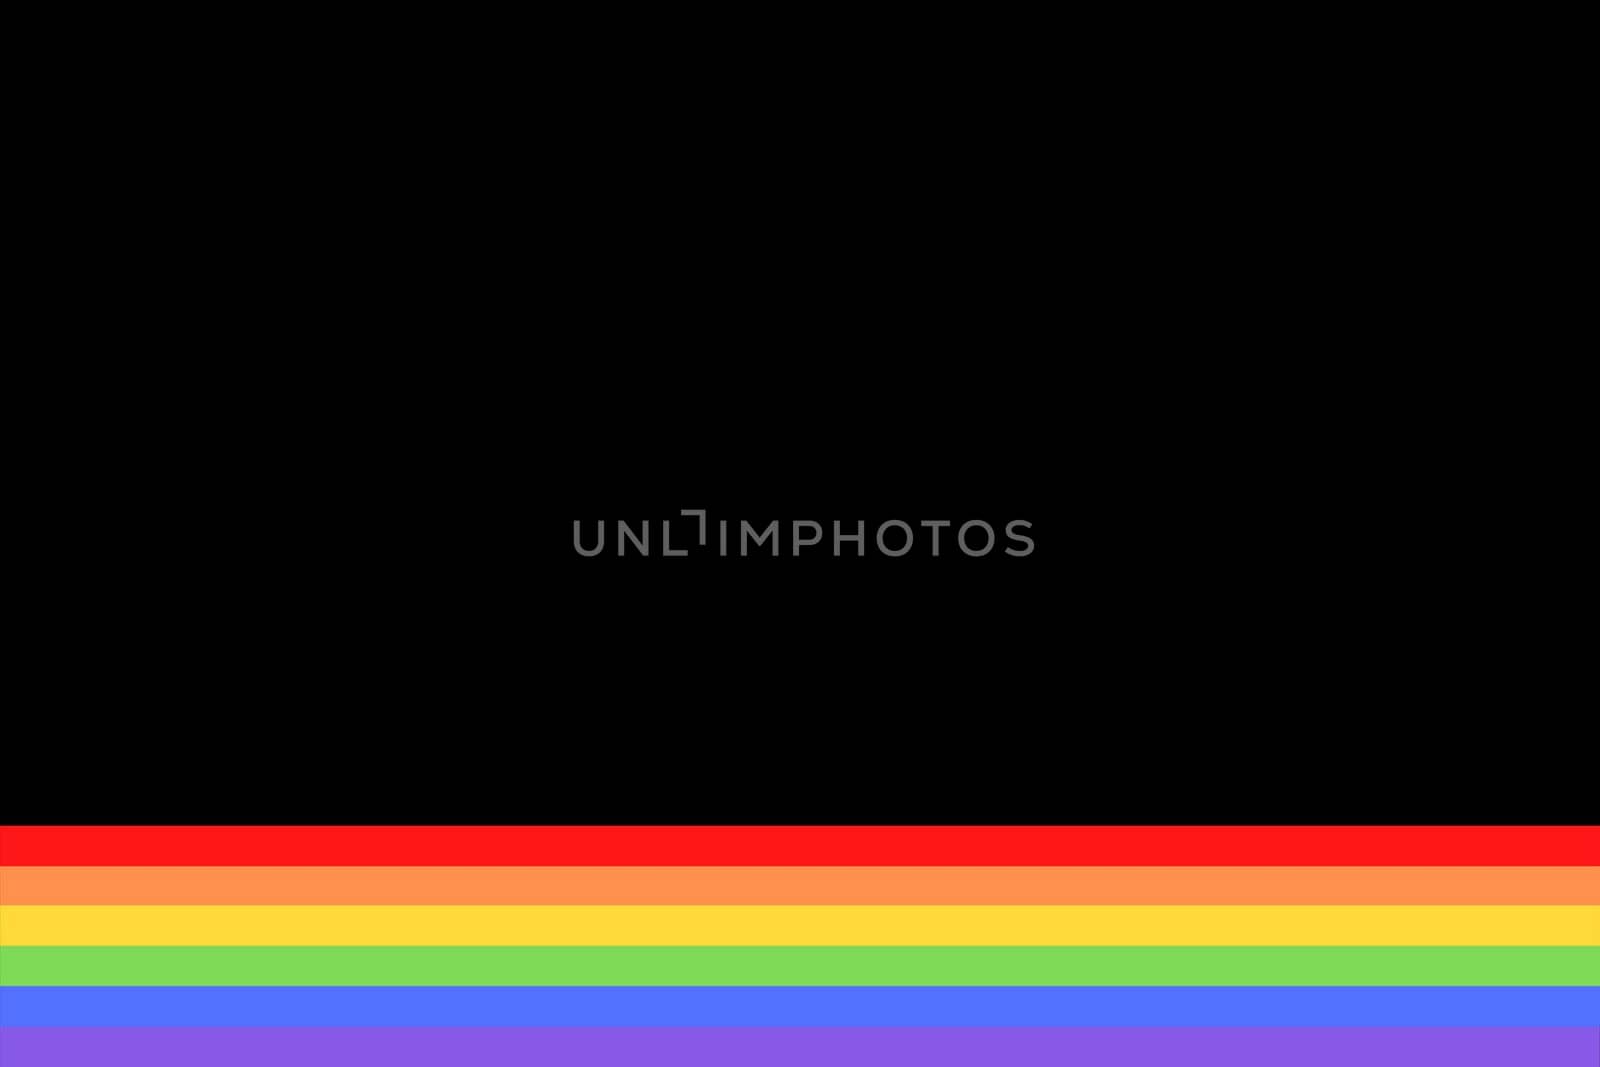 illustration with colorful rainbow flag or pride flag / banner of LGBTQ (Lesbian, gay, bisexual, transgender & Queer) organization as border at bottom. Pride month parades are celebrated in June